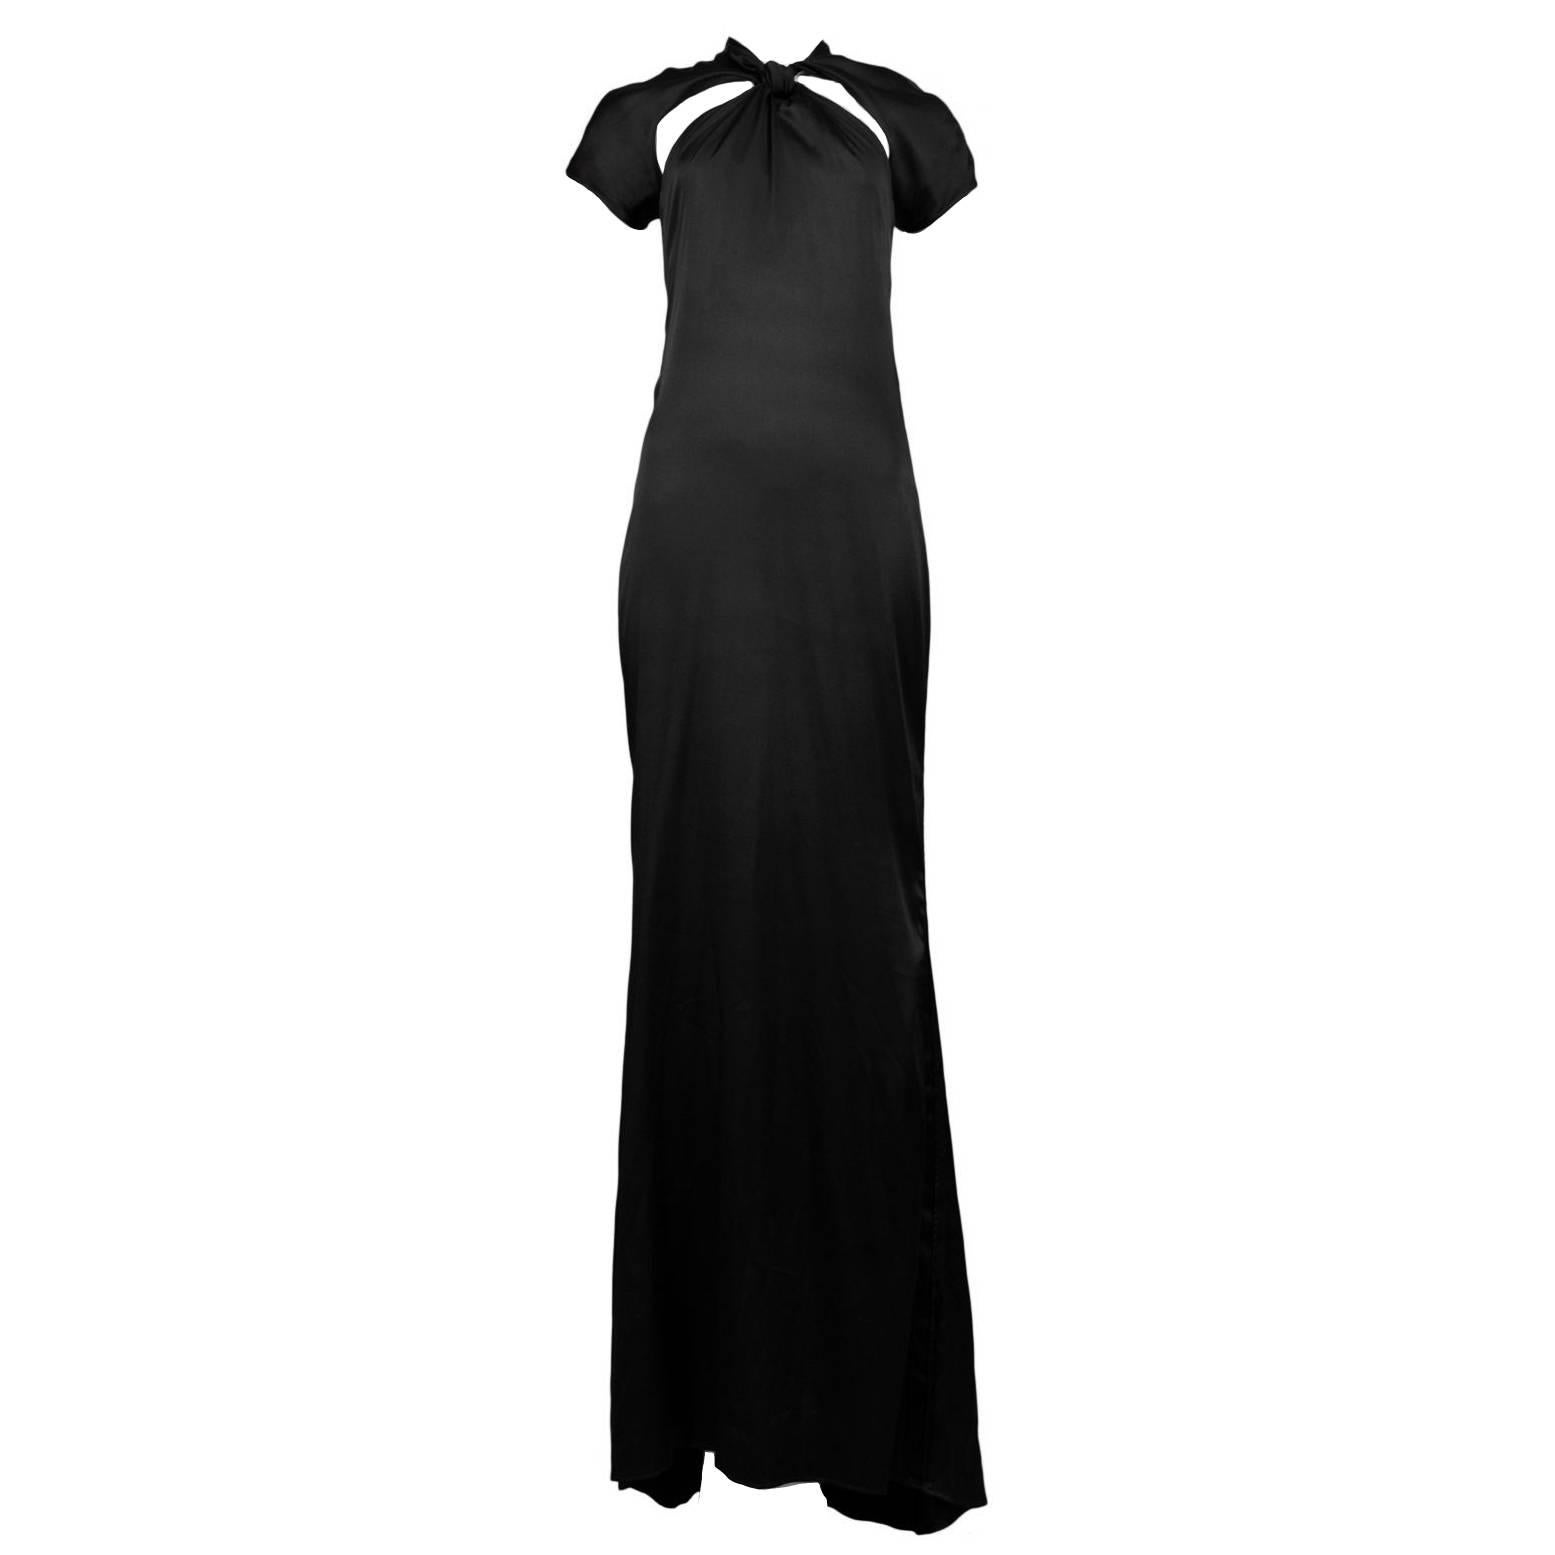 Tom Ford for Gucci Black Satin Knot Gown